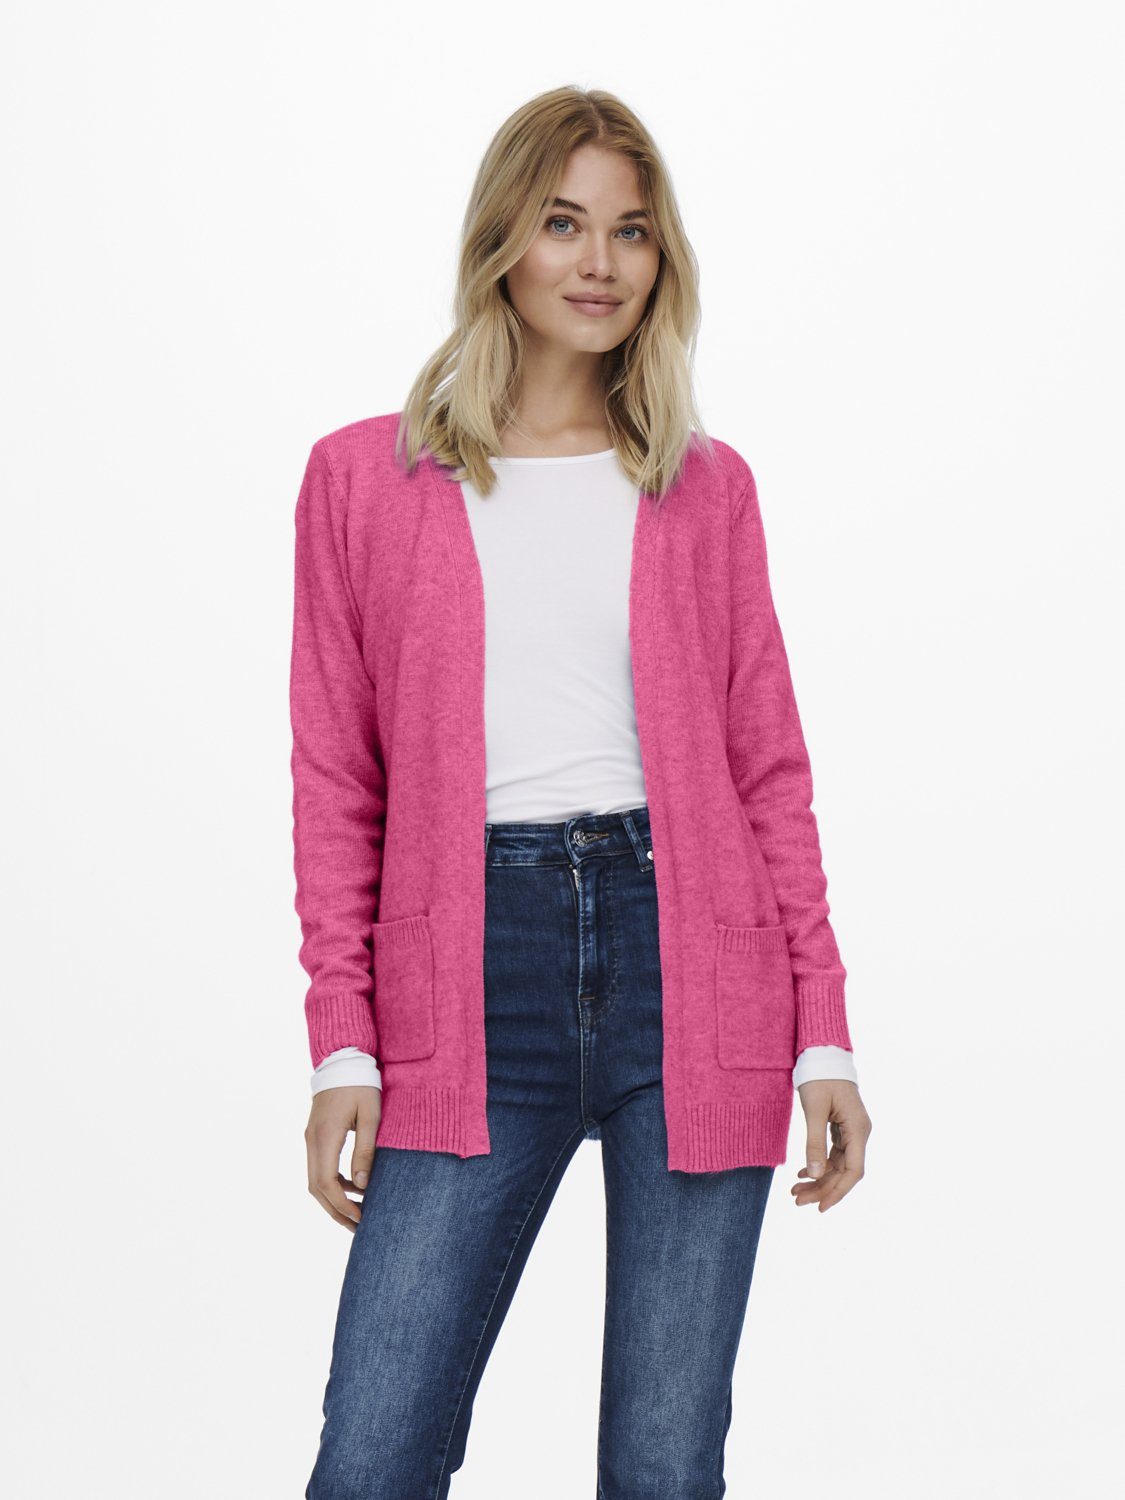 Strick-Jacke offen - Cardigan Knt Open ONLY Damen OnlLesly Cardigan Only female Pink